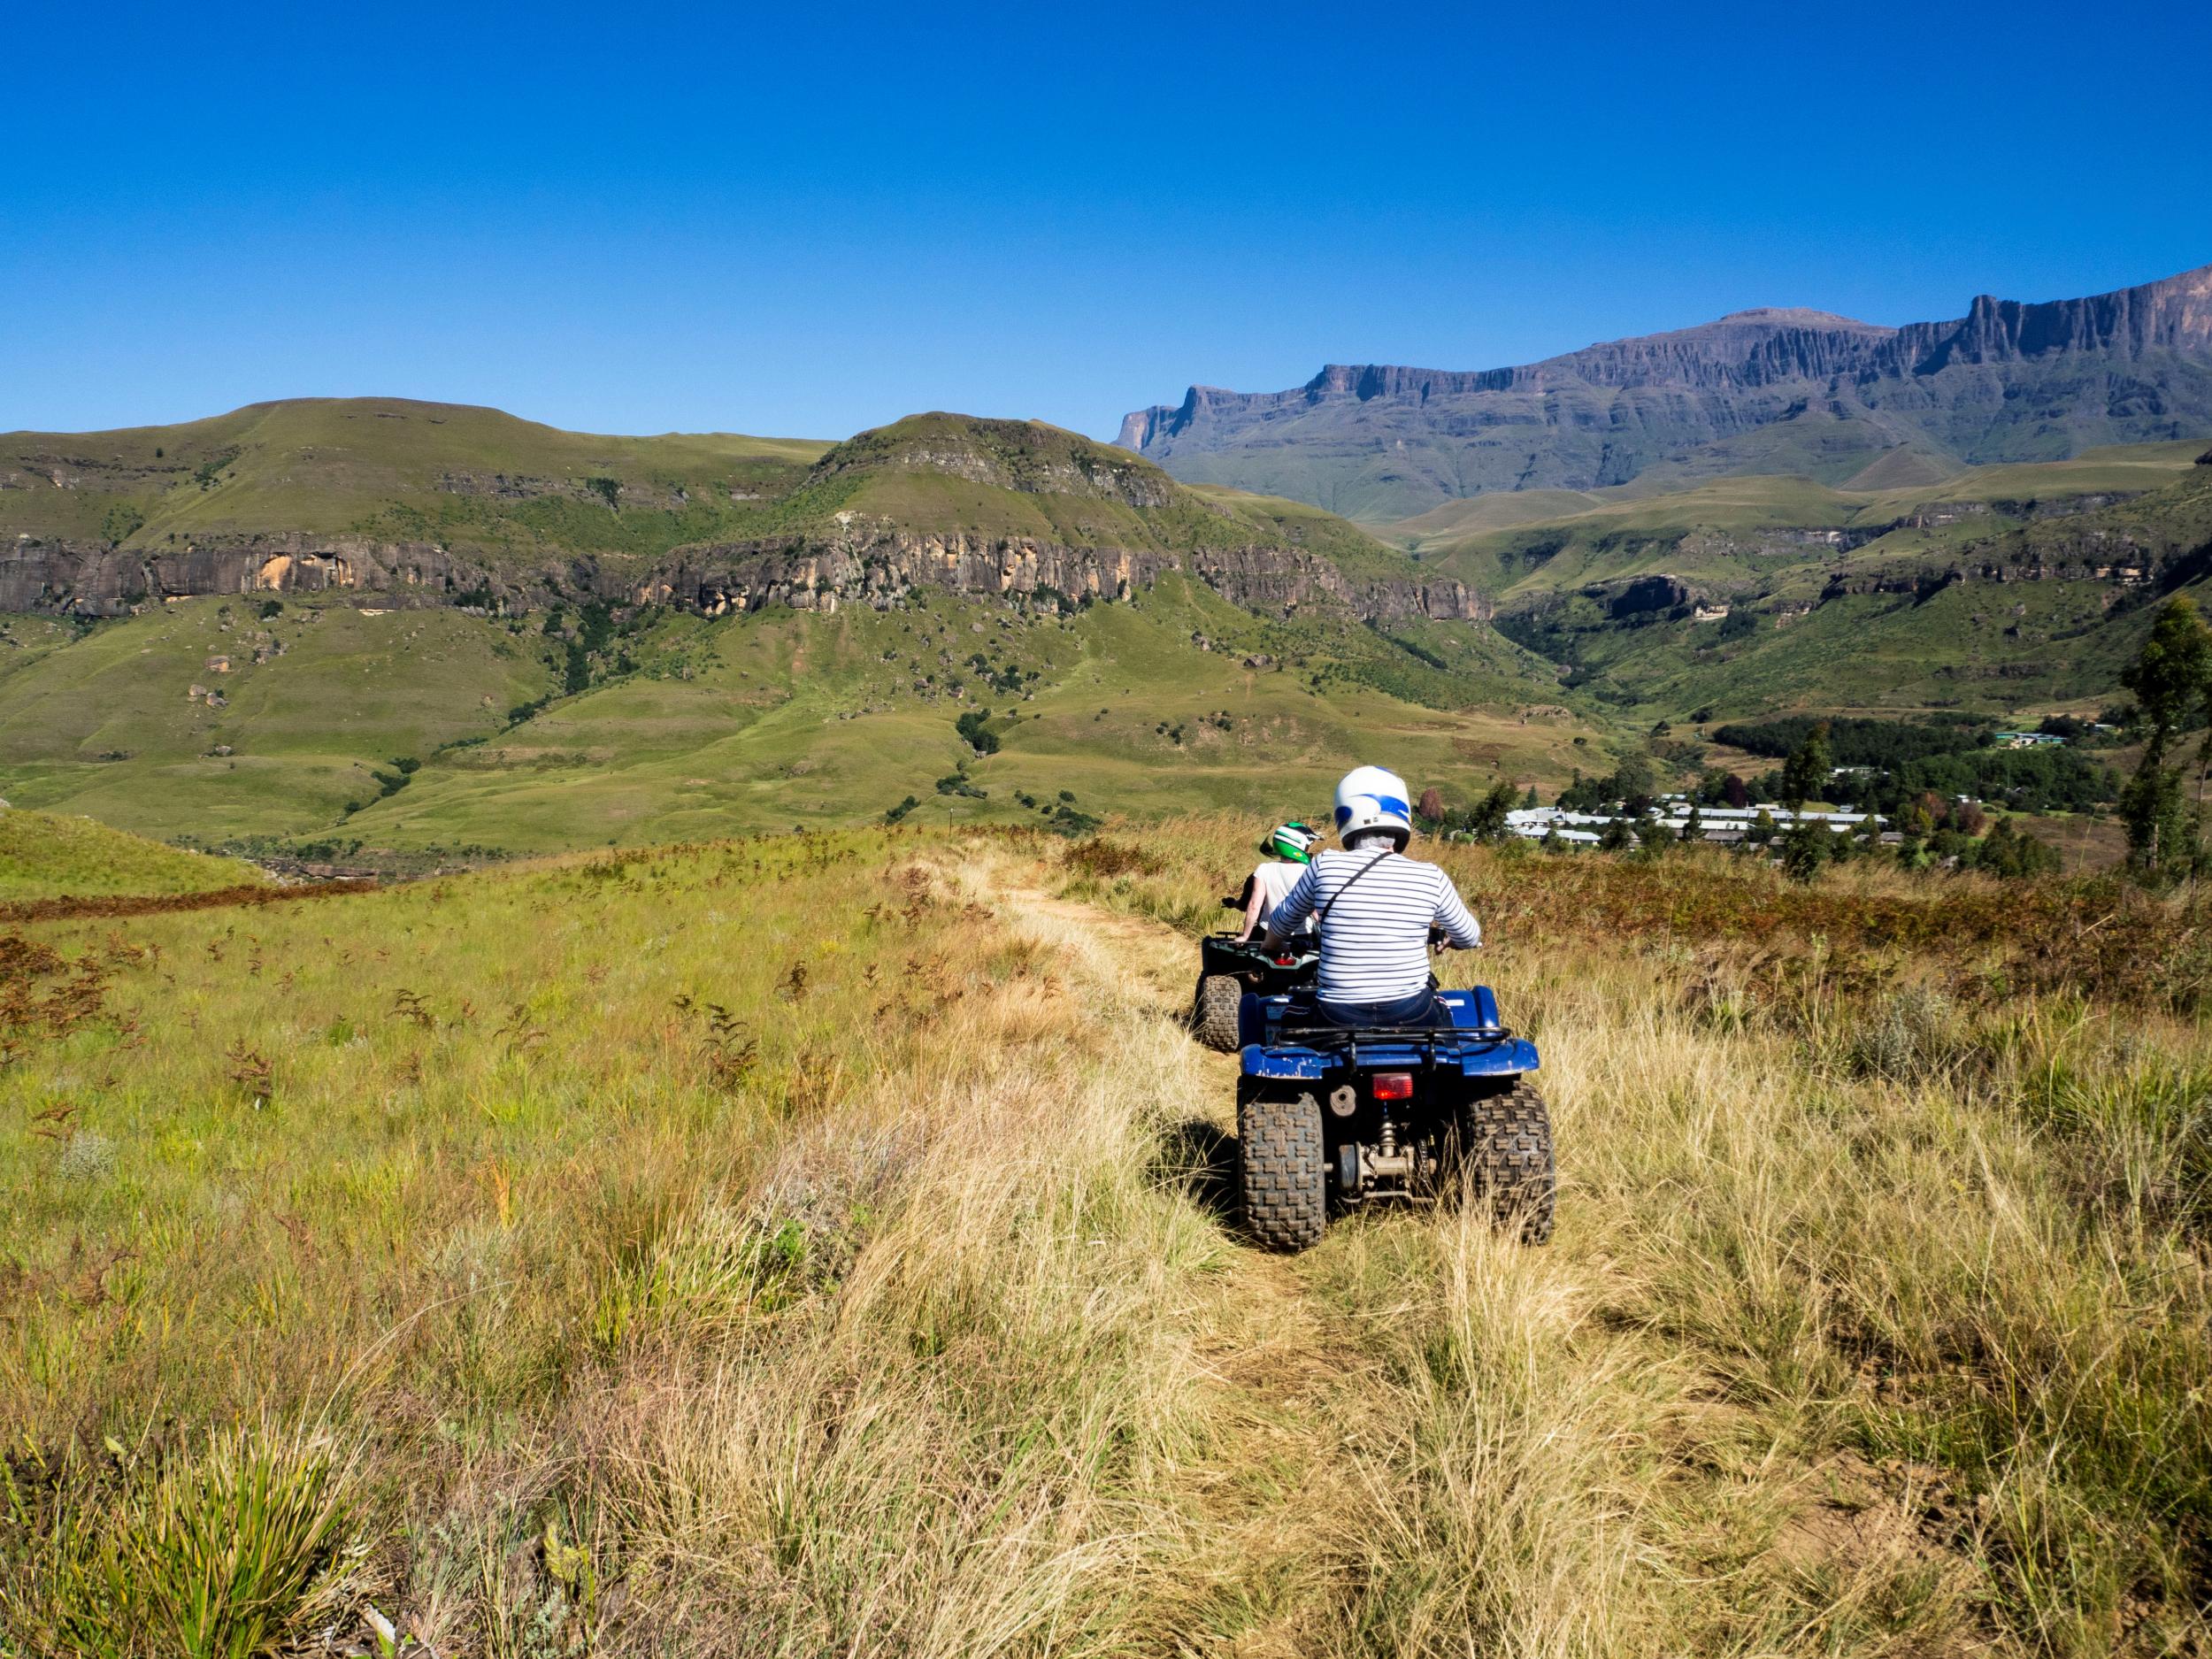 Quad biking is a great way to traverse the rocky trails